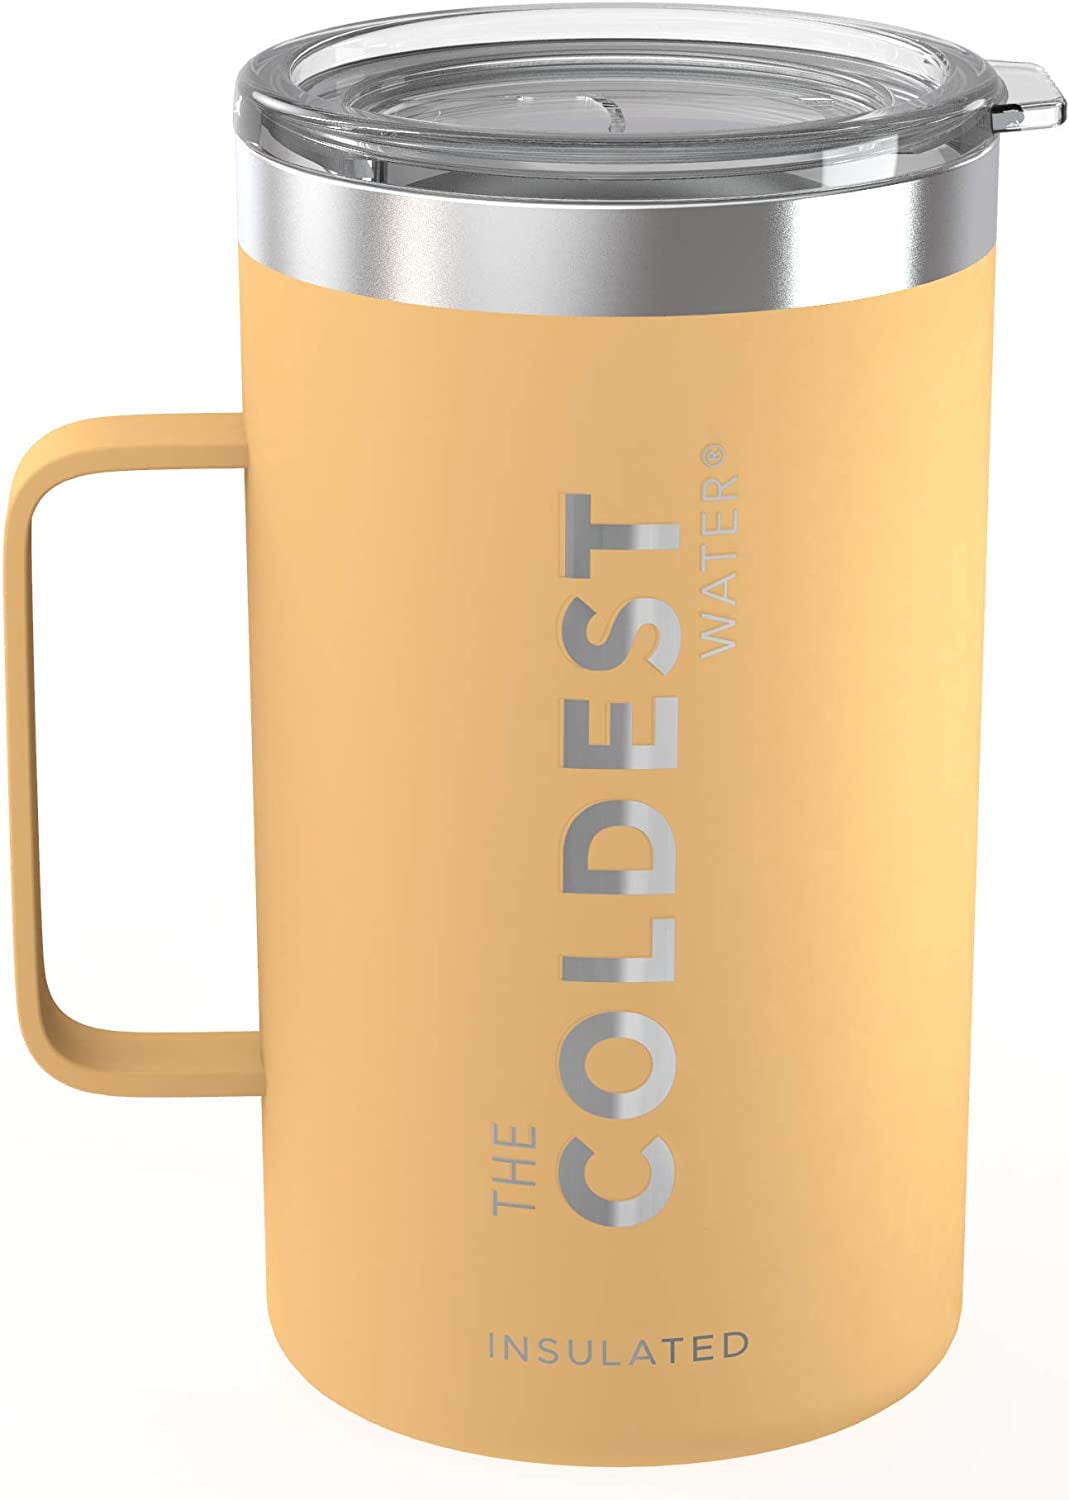 The Coldest Coffee Mug - Stainless Steel Super Insulated Travel Mug for Hot  & Cold Drinks, Best for Tea, Lattes, Cappuccino Coffee Cup( Stealth Black  10 Oz) 